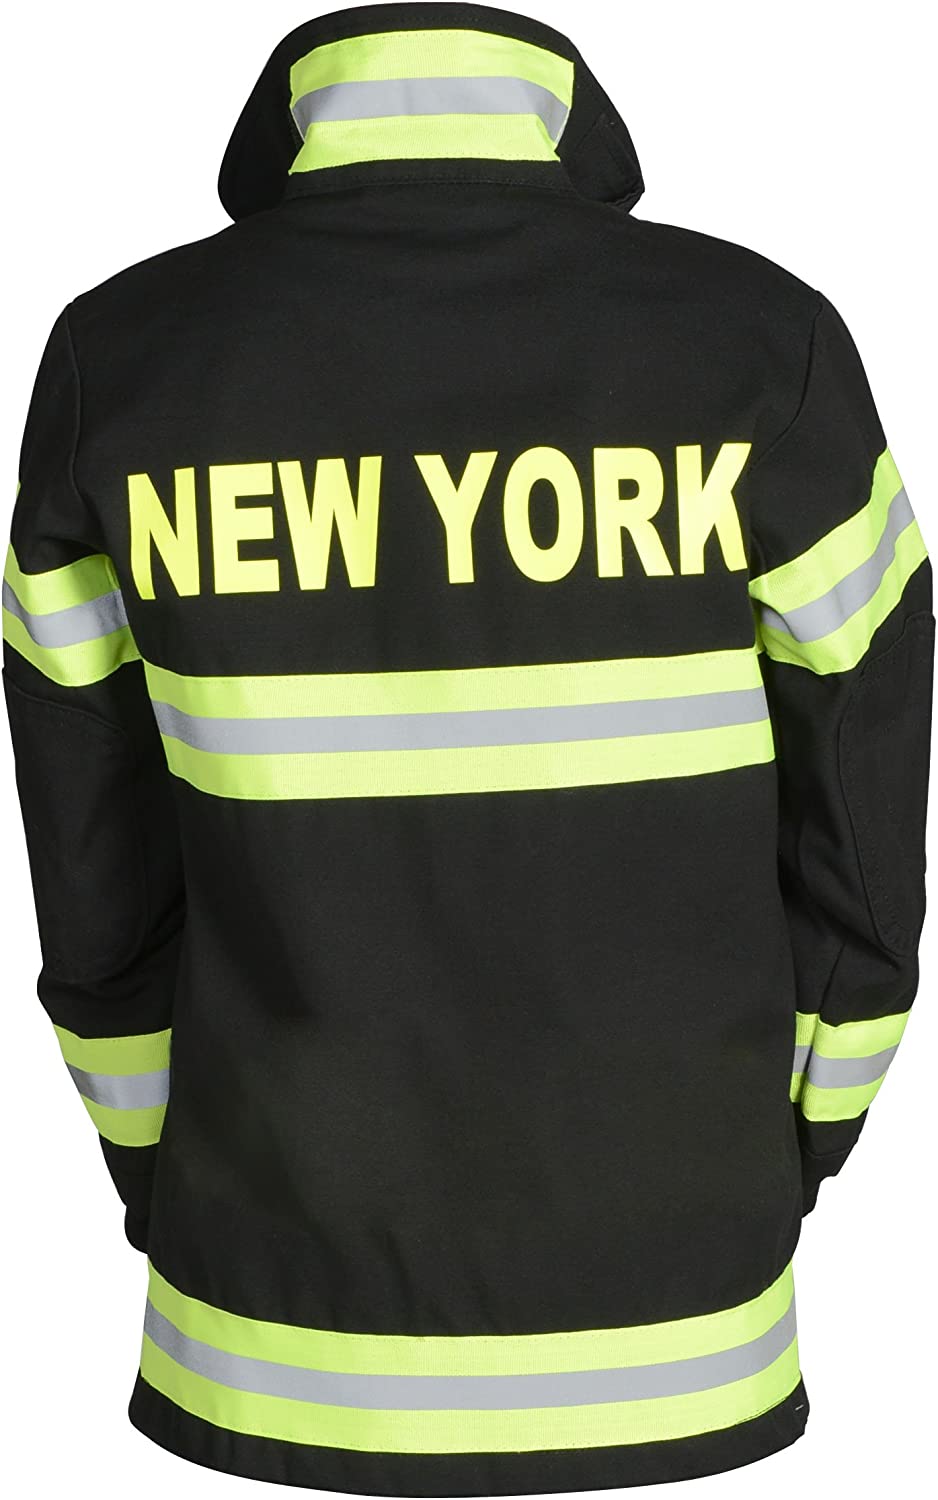 Aeromax Adult Fire Fighter New York Suit, Large, Multicolor